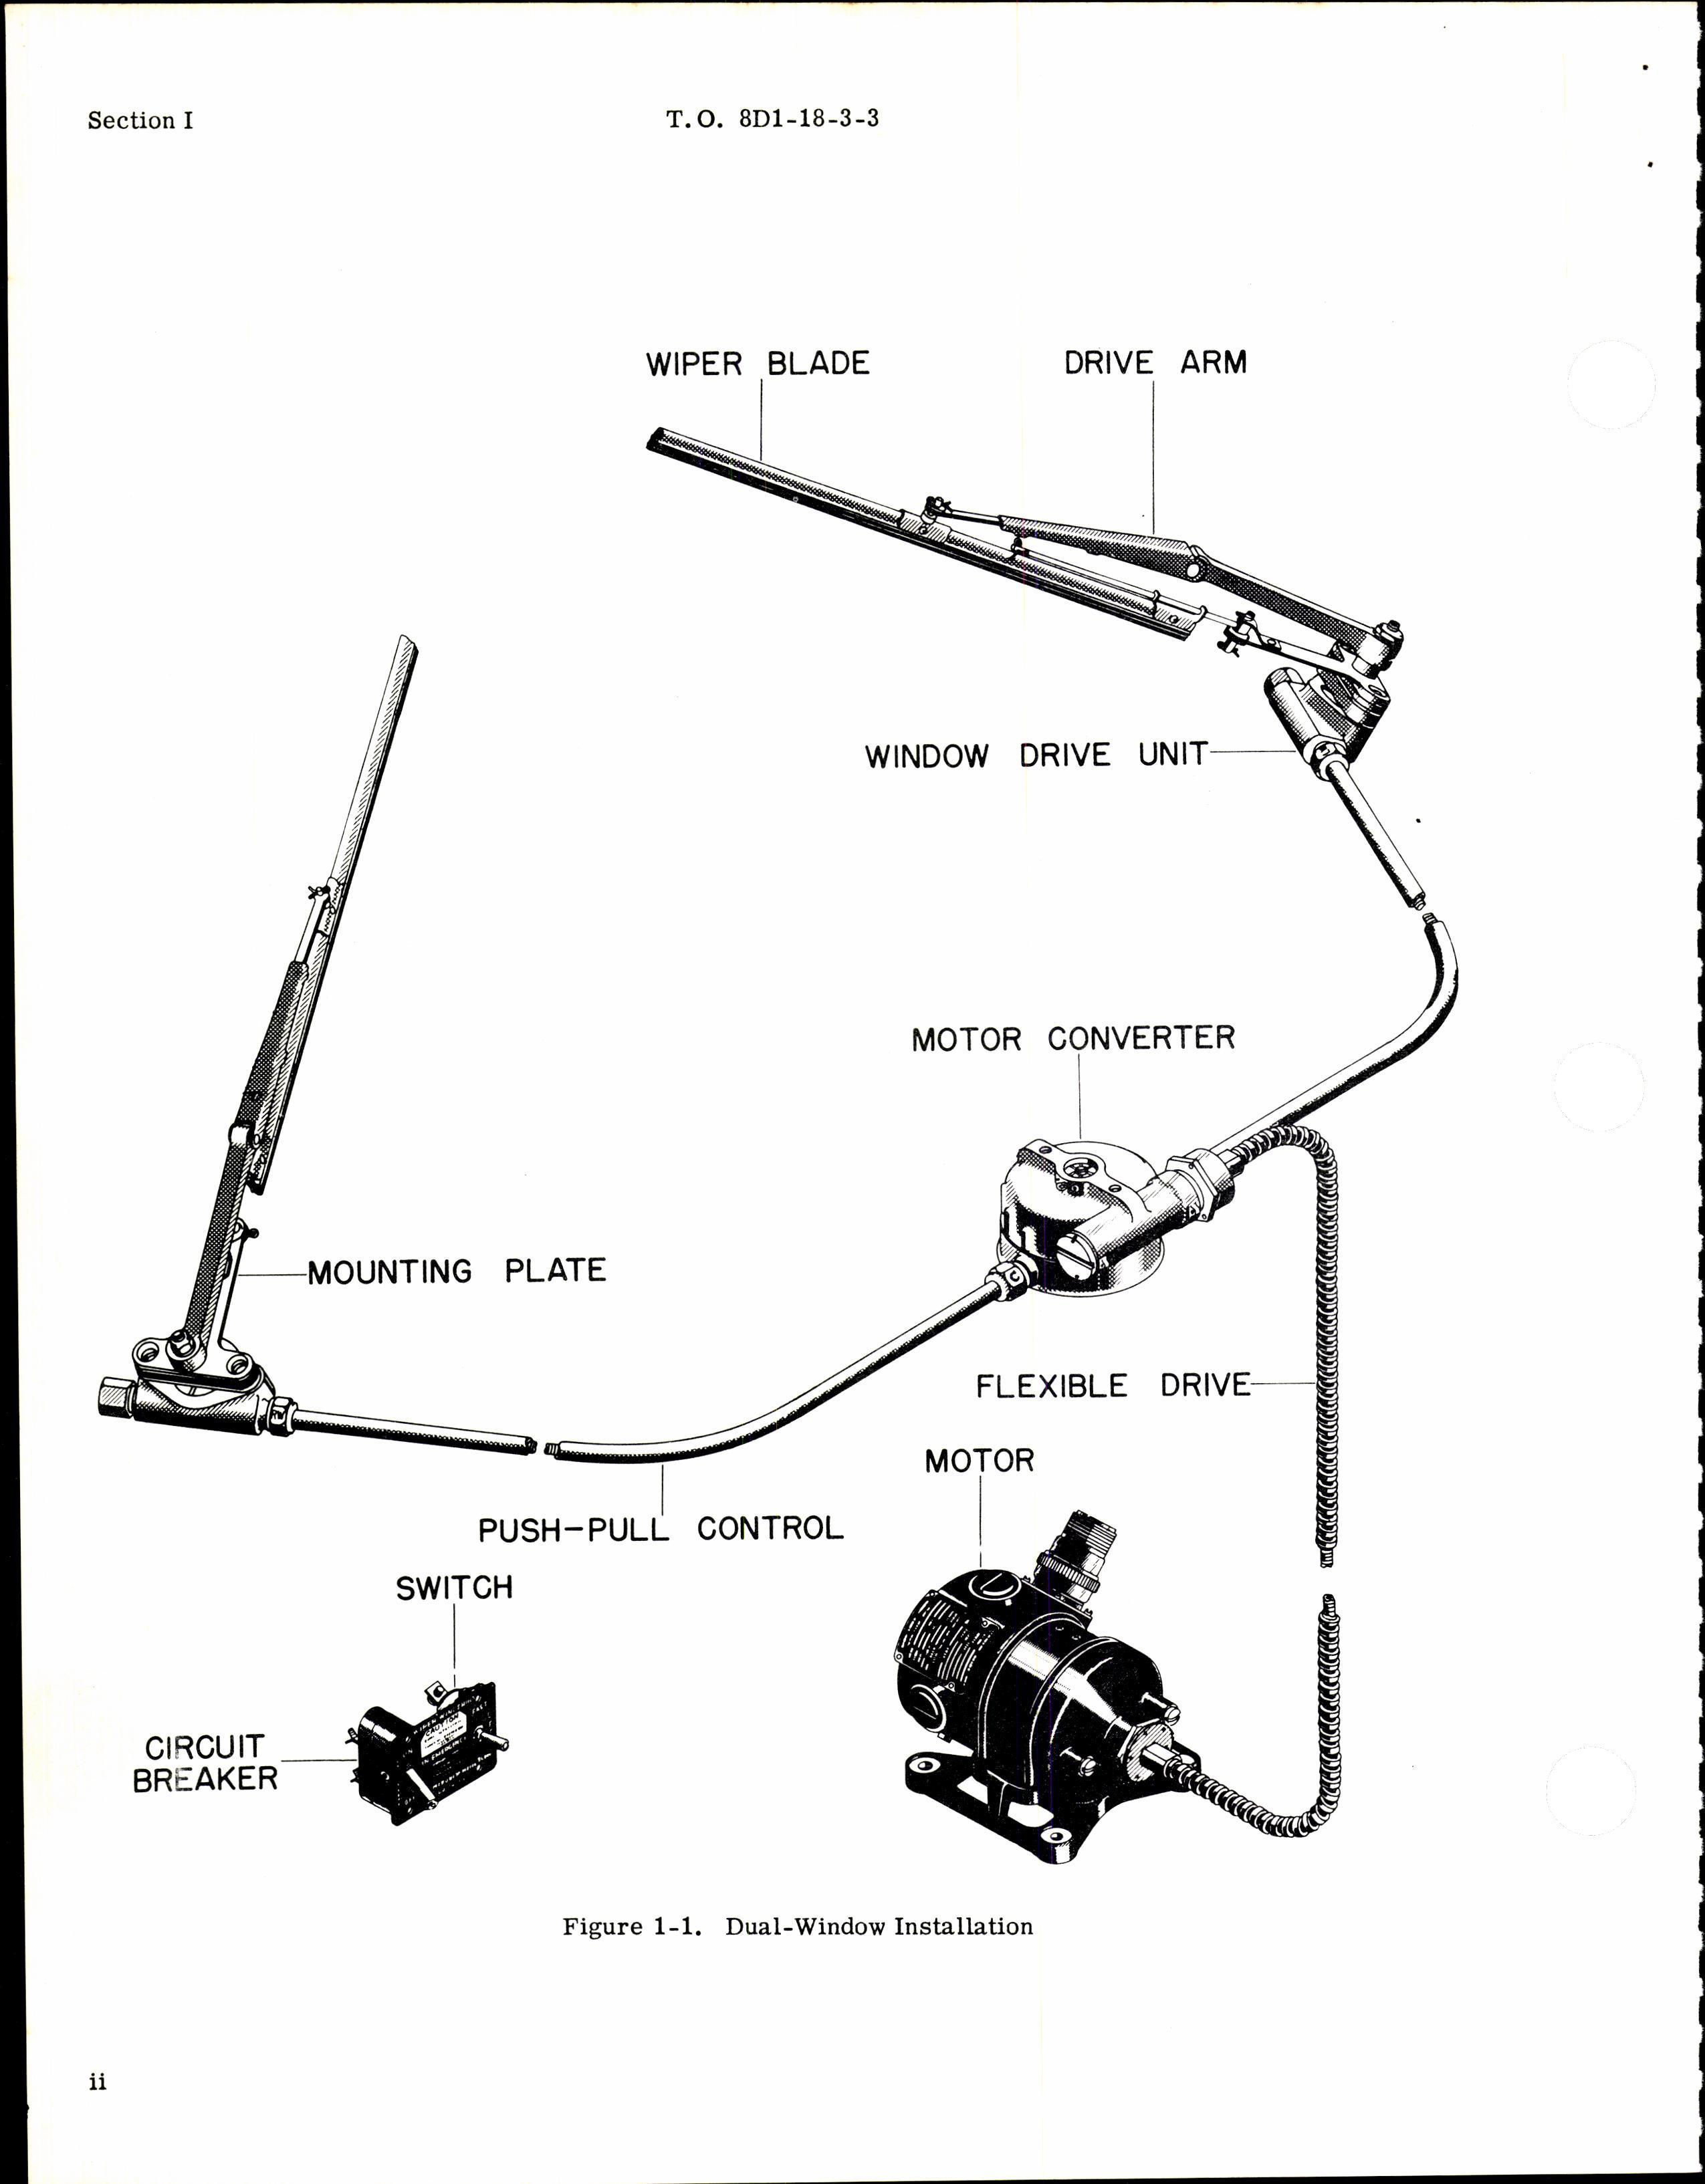 Sample page 4 from AirCorps Library document: Overhaul Instructions for Electric Windshield Wipers